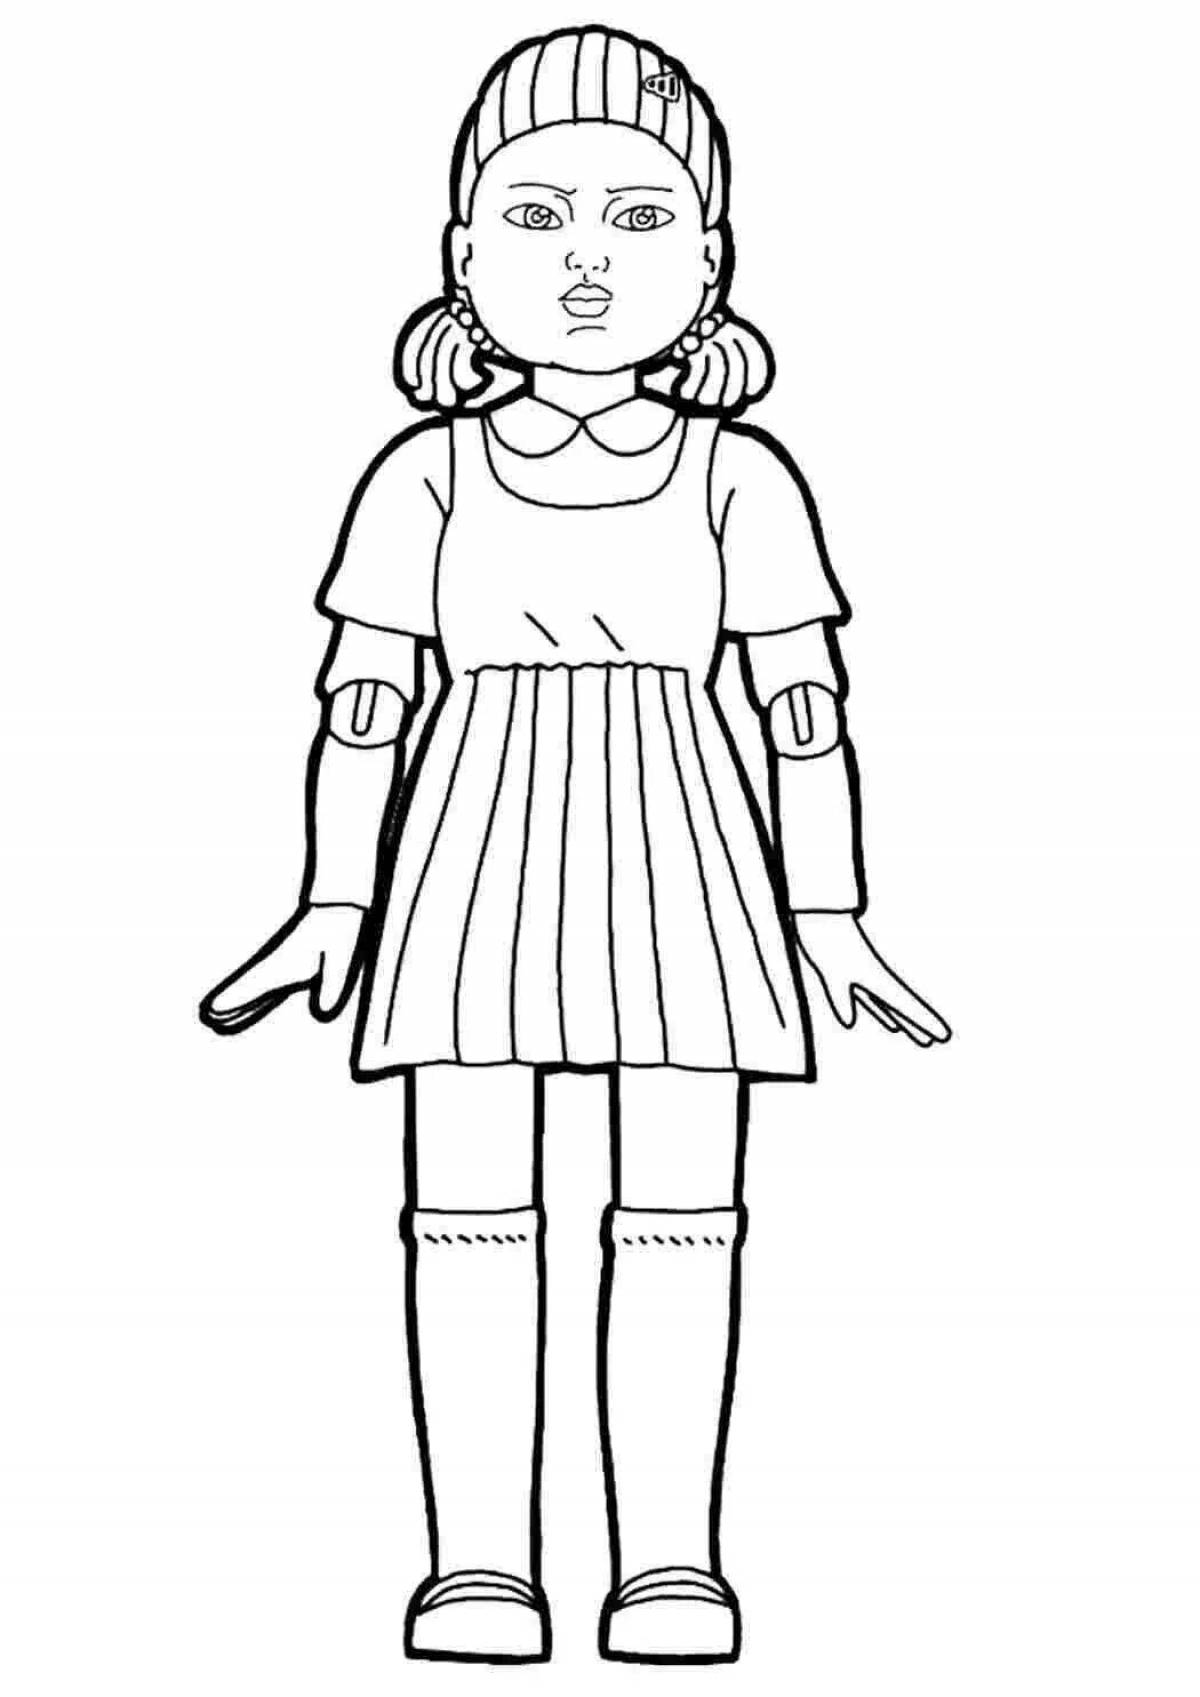 Unusual coloring pages of children's long legs